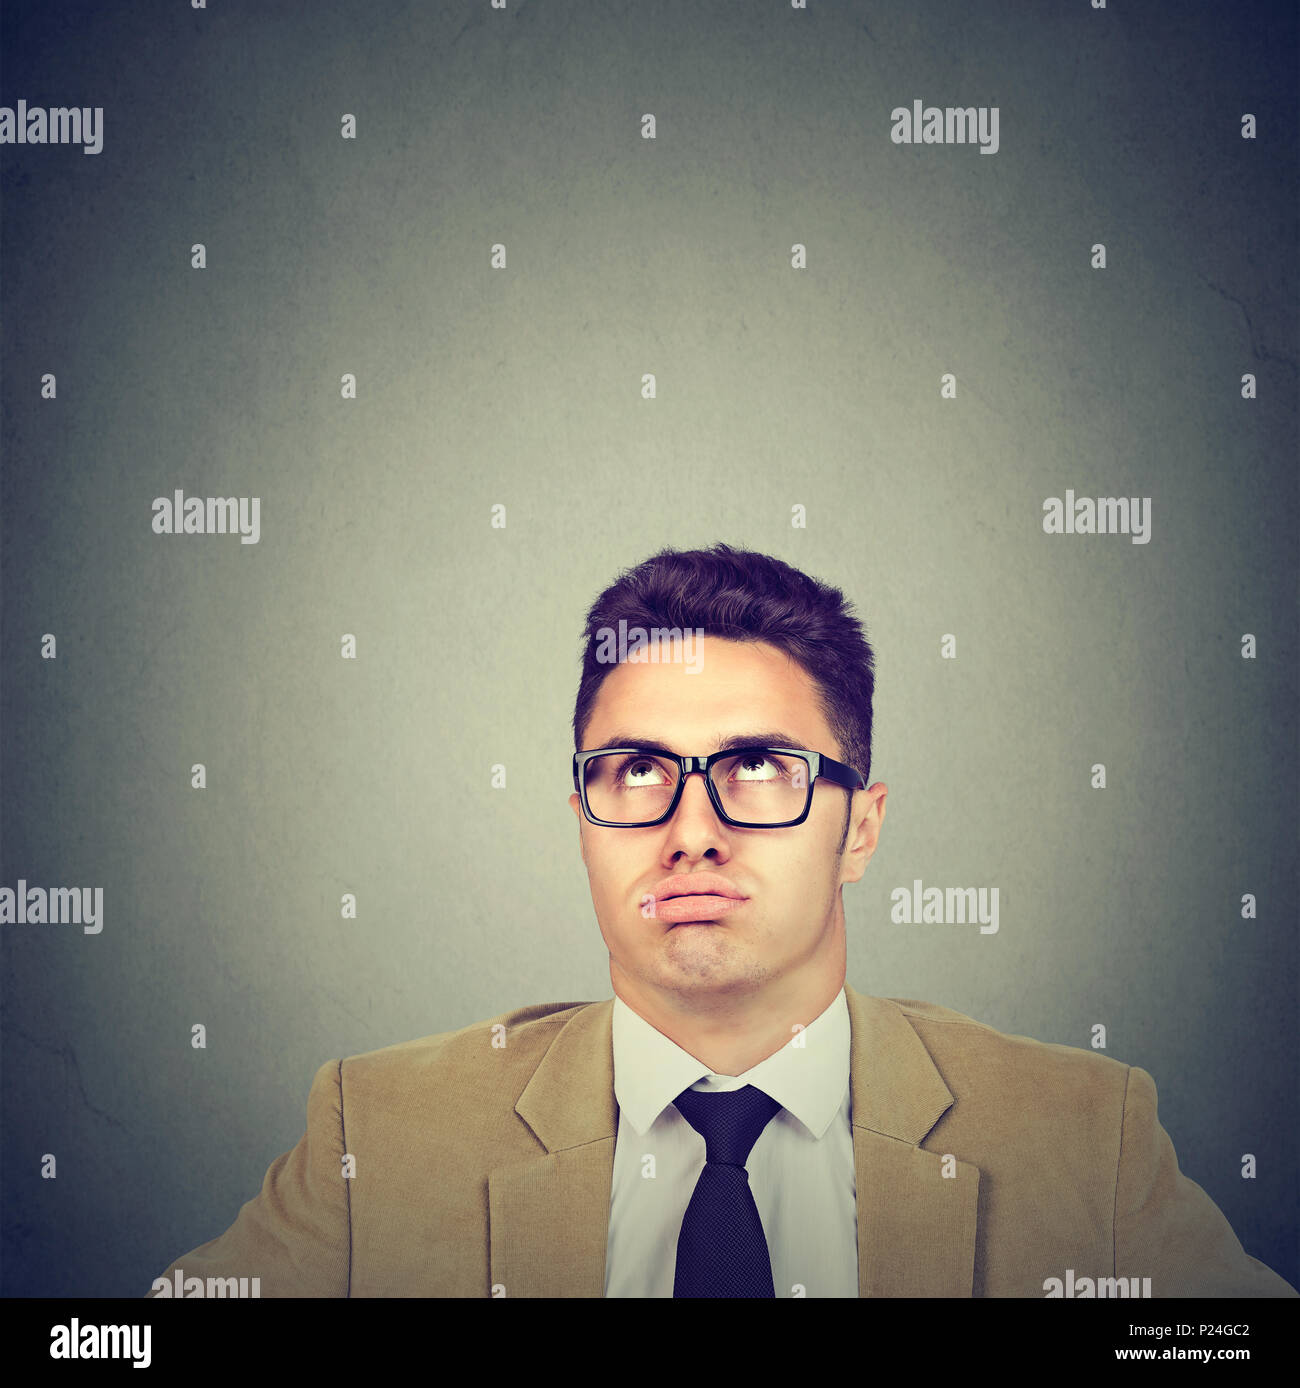 Bored annoyed young business man Stock Photo